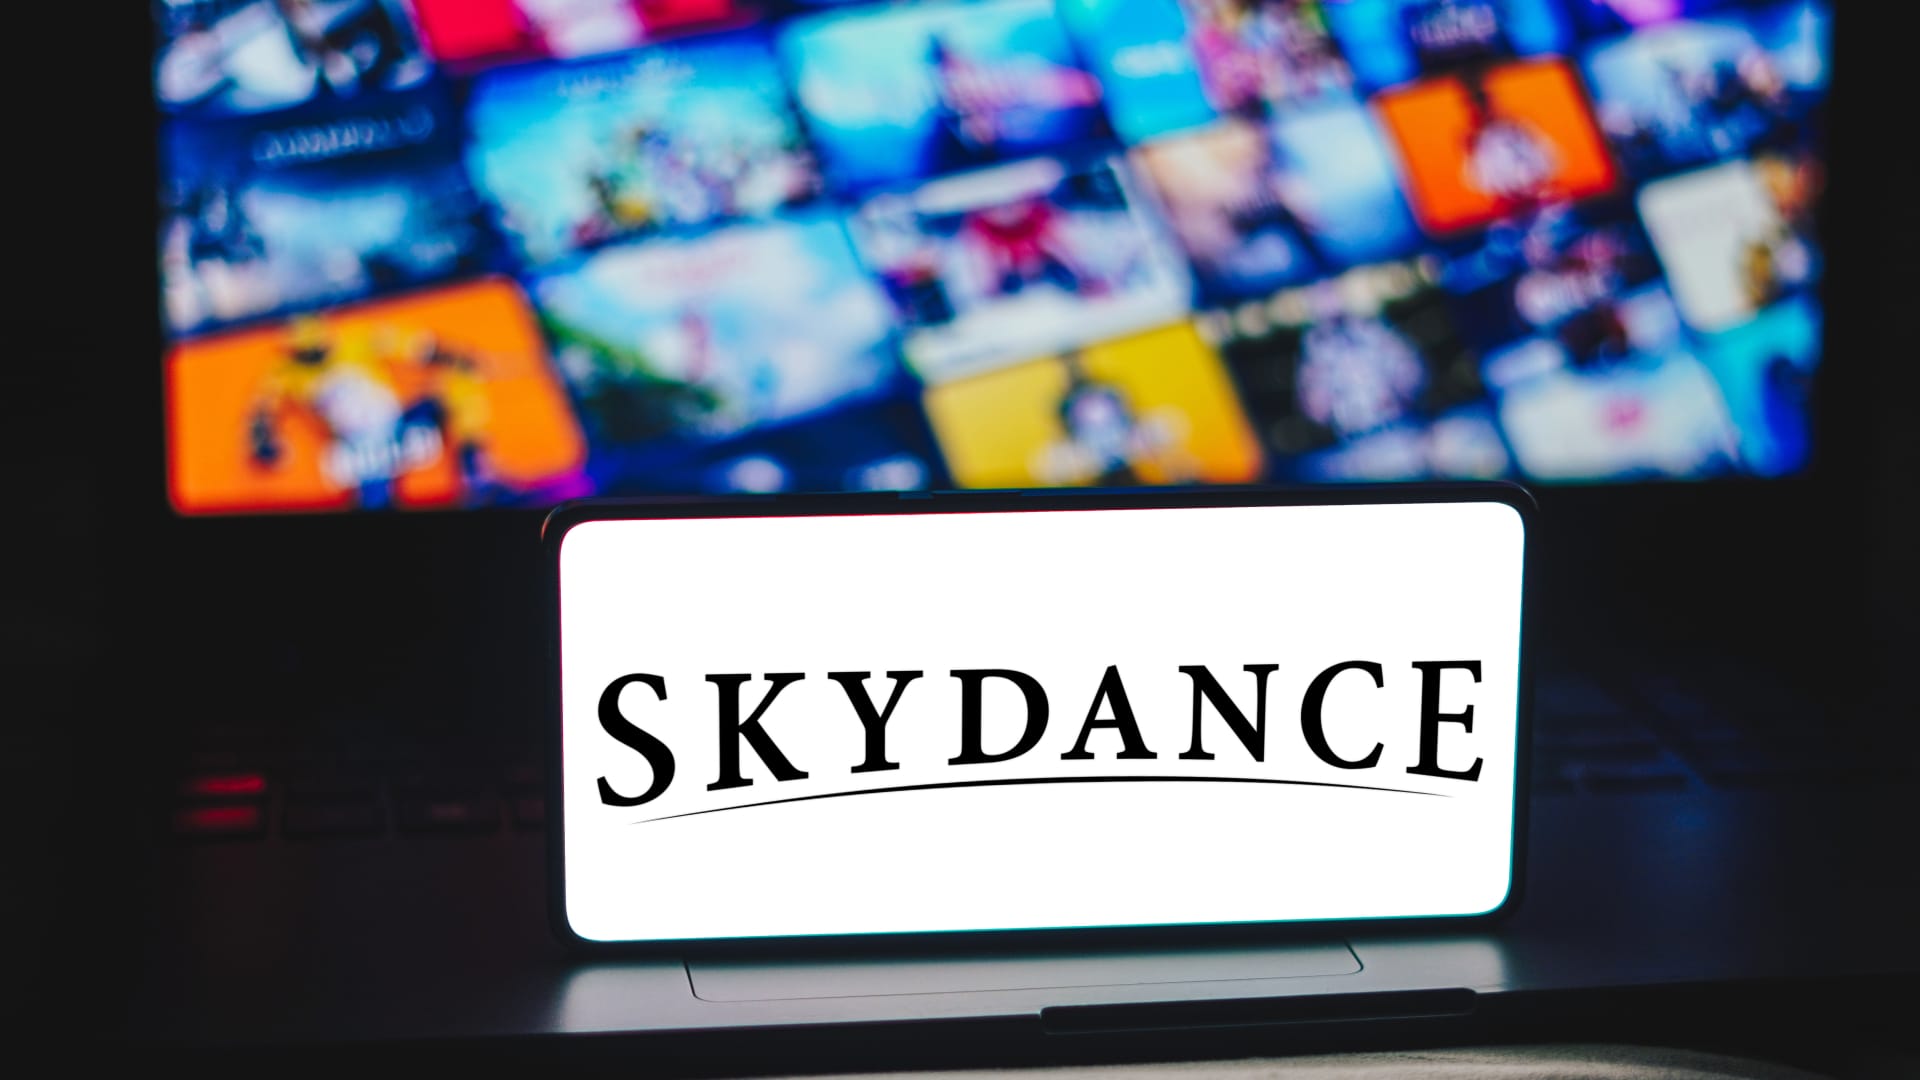 Paramount stock slumps on reports that Skydance merger would require company to raise new equity